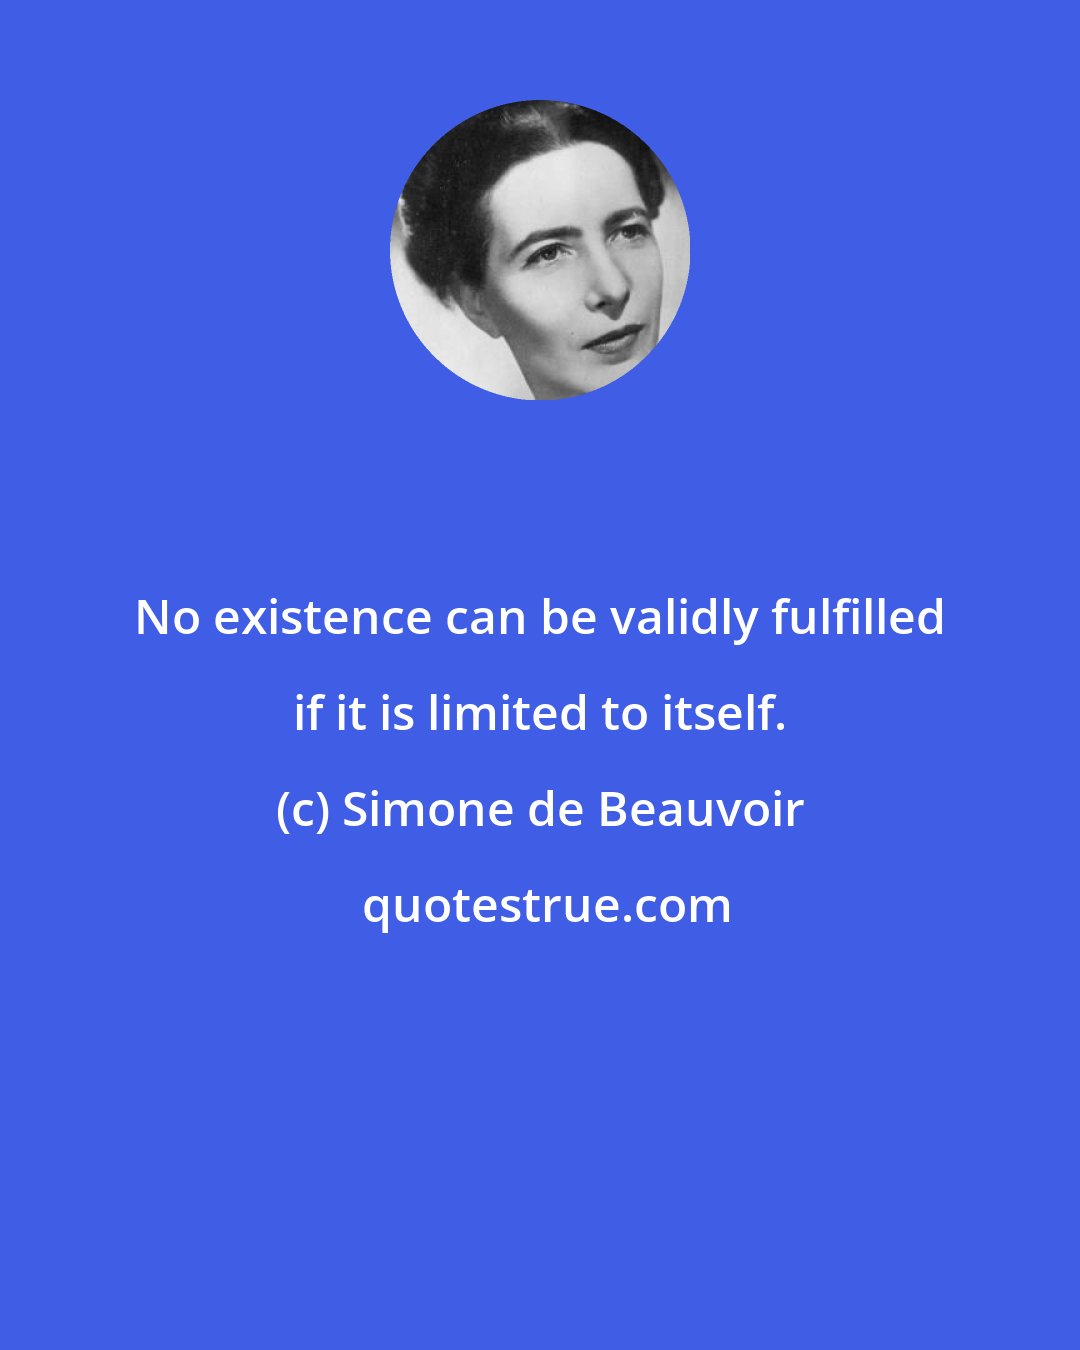 Simone de Beauvoir: No existence can be validly fulfilled if it is limited to itself.